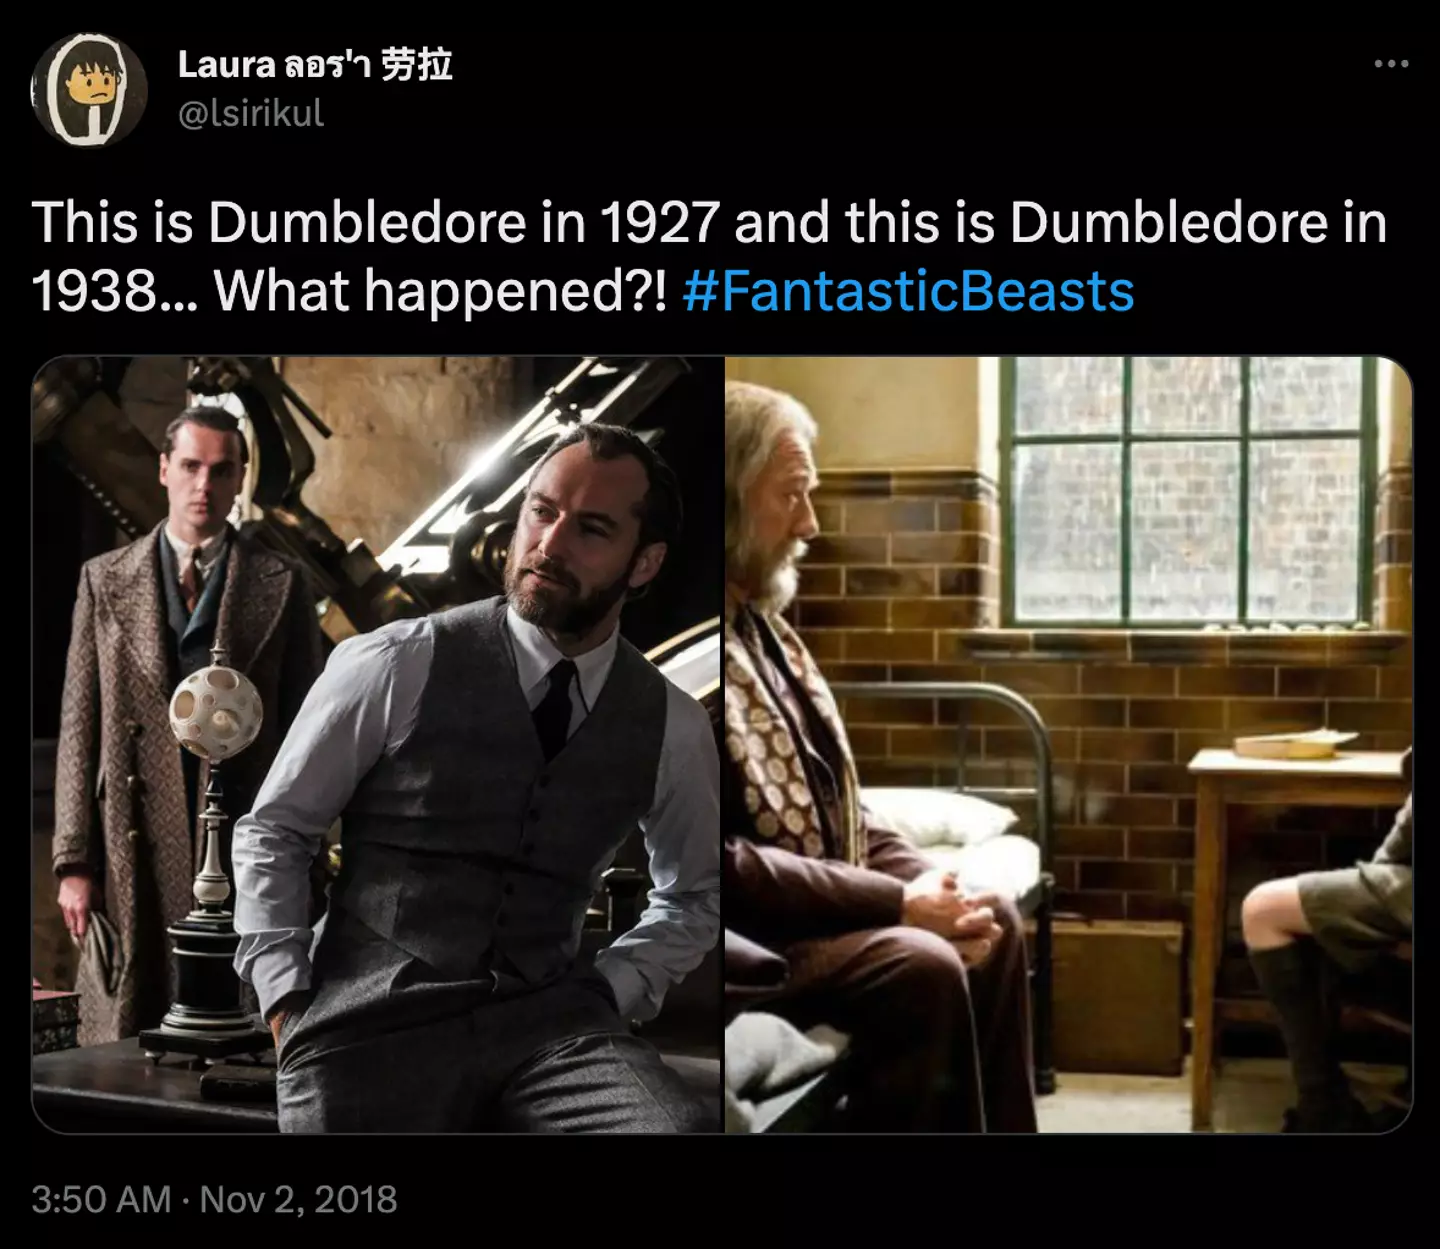 Despite only 11 years having past between the two images, Dumbledore appears to have aged considerably more.